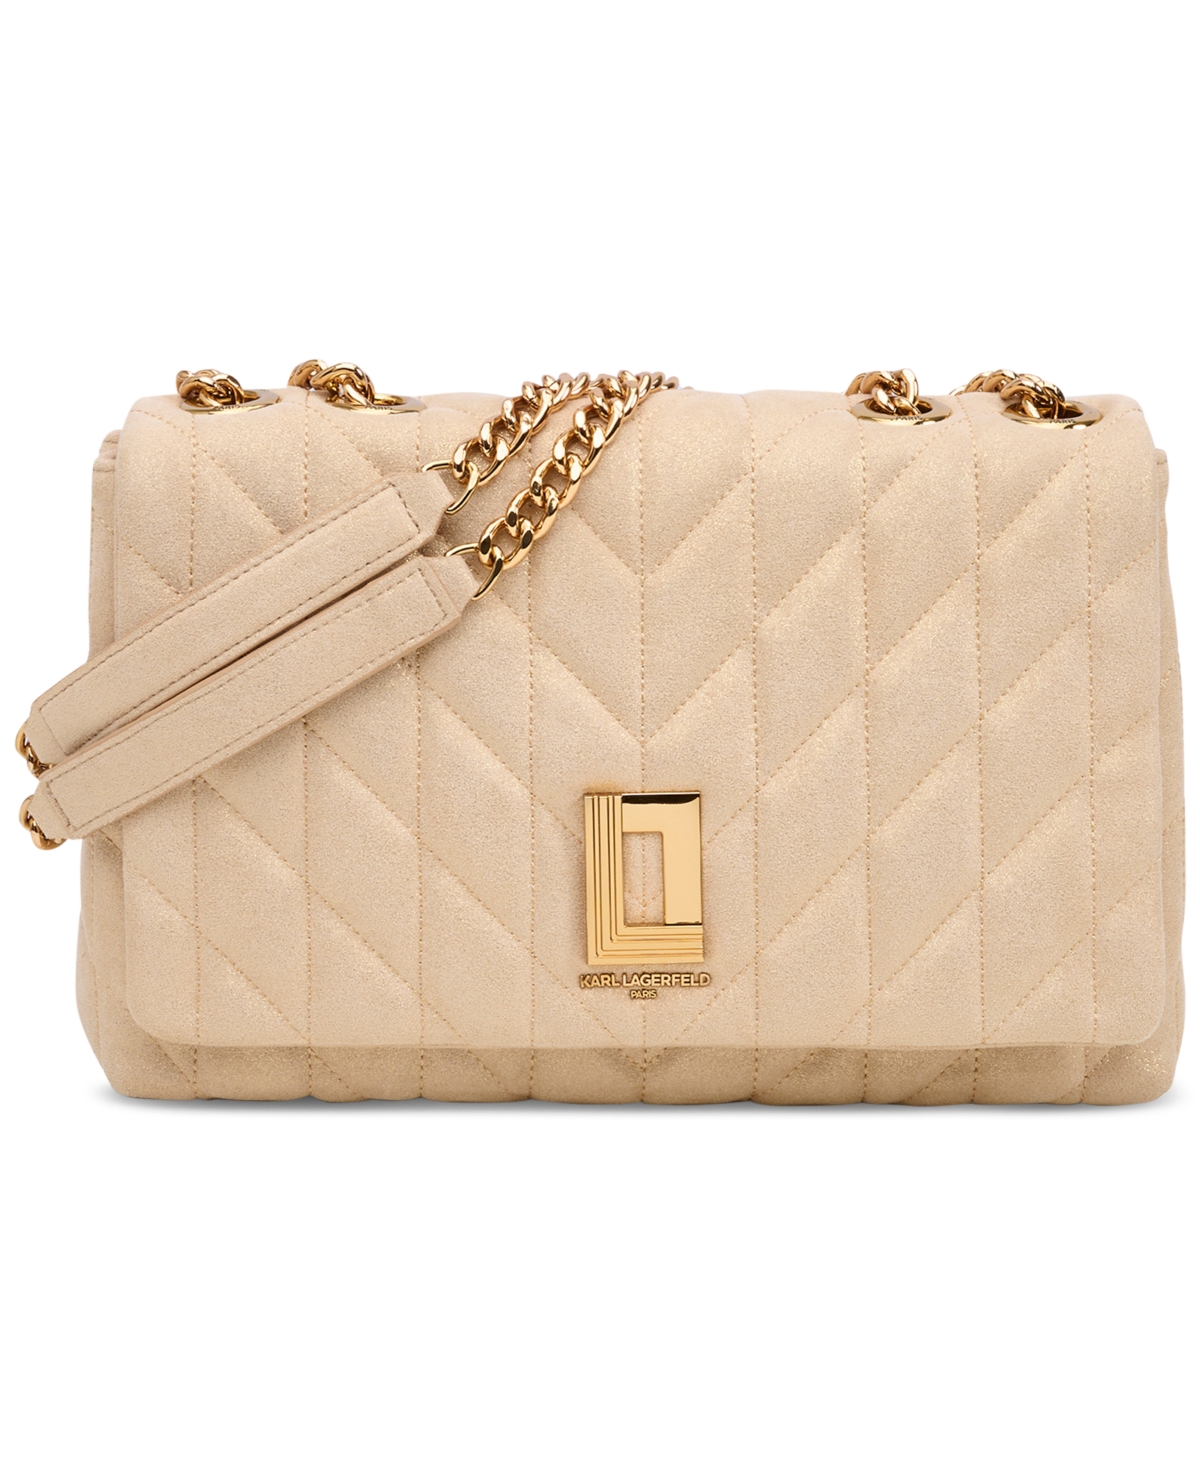 KARL LAGERFELD LAFAYETTE QUILTED SHOULDER